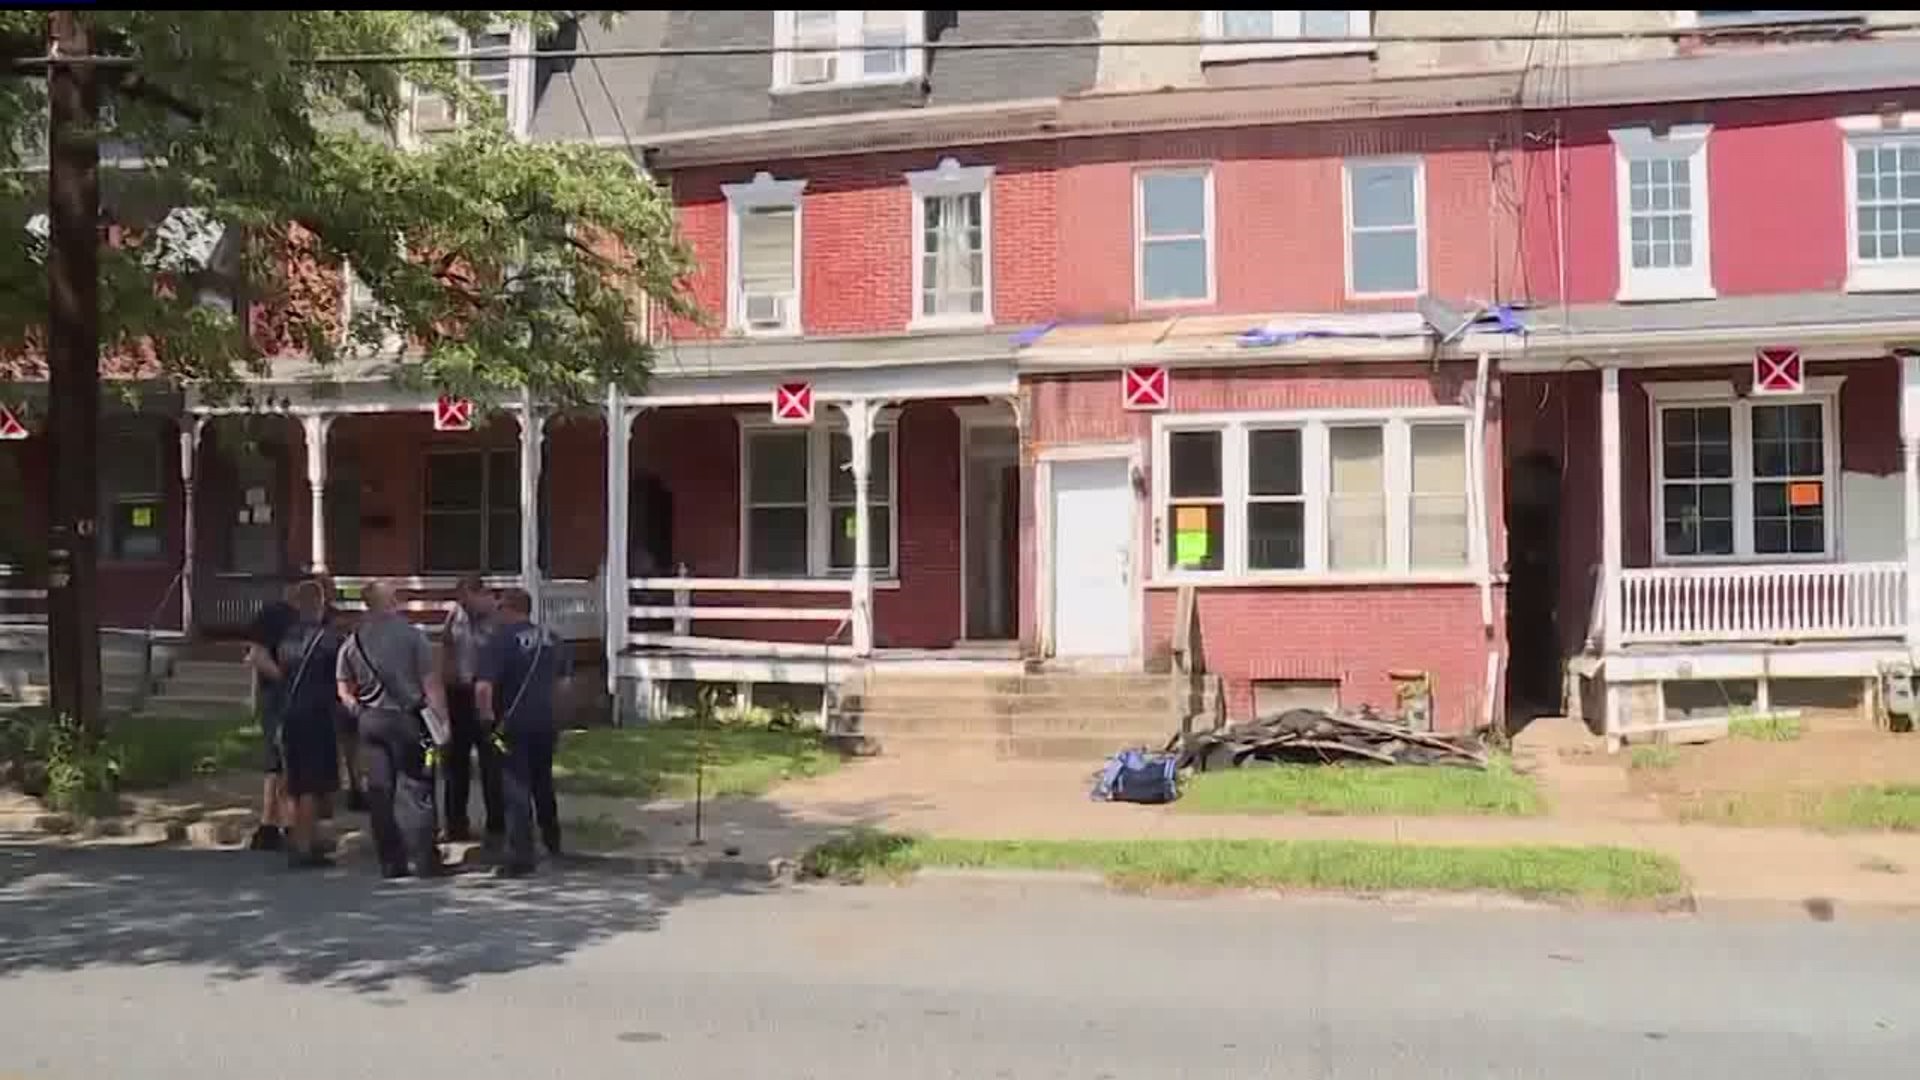 17 People Displaced After Buildings Deemed Unsafe